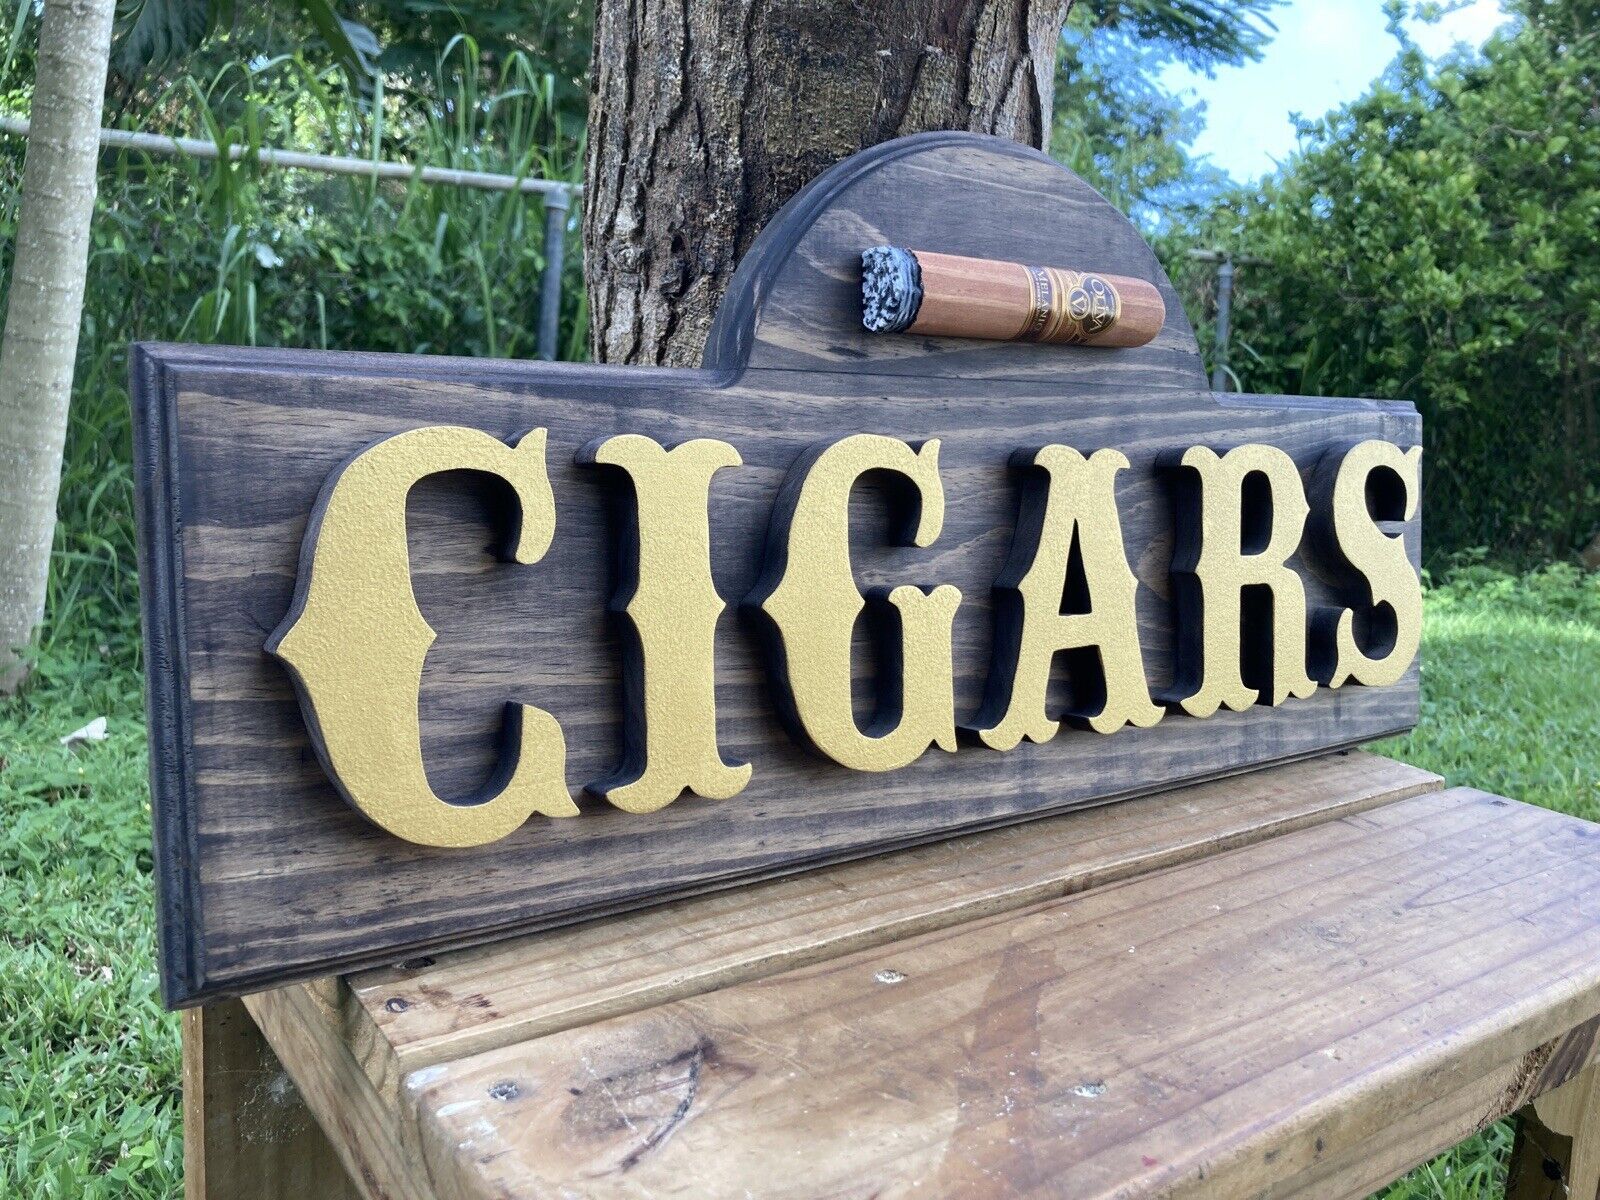 Cigar Lounge Whiskey Bar Cigars Wood Sign Raised Rustic Tavern Antique Look